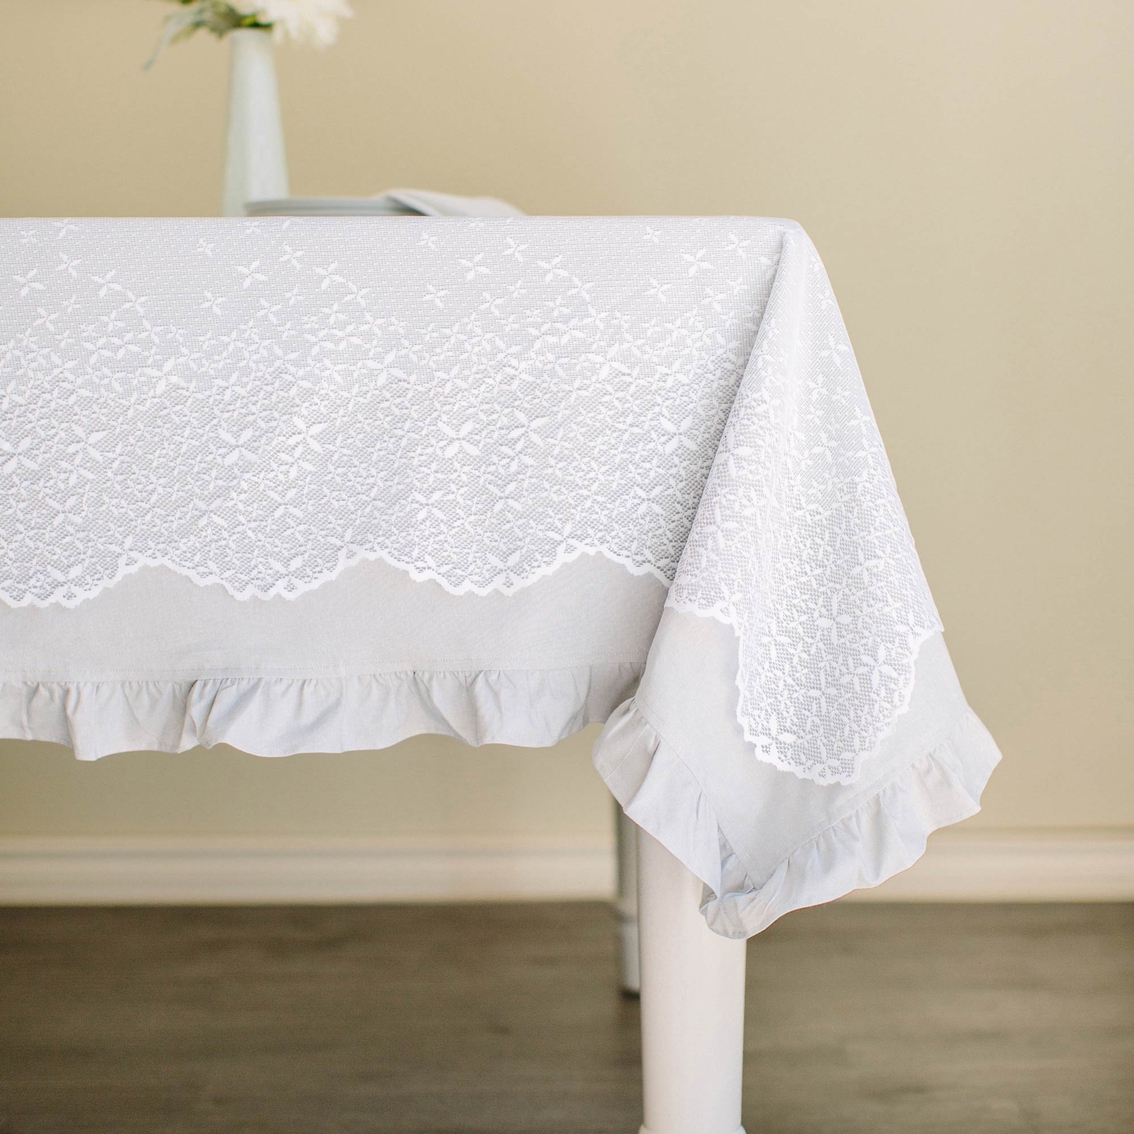 Benson Mills Maisey Lace Tablecloth